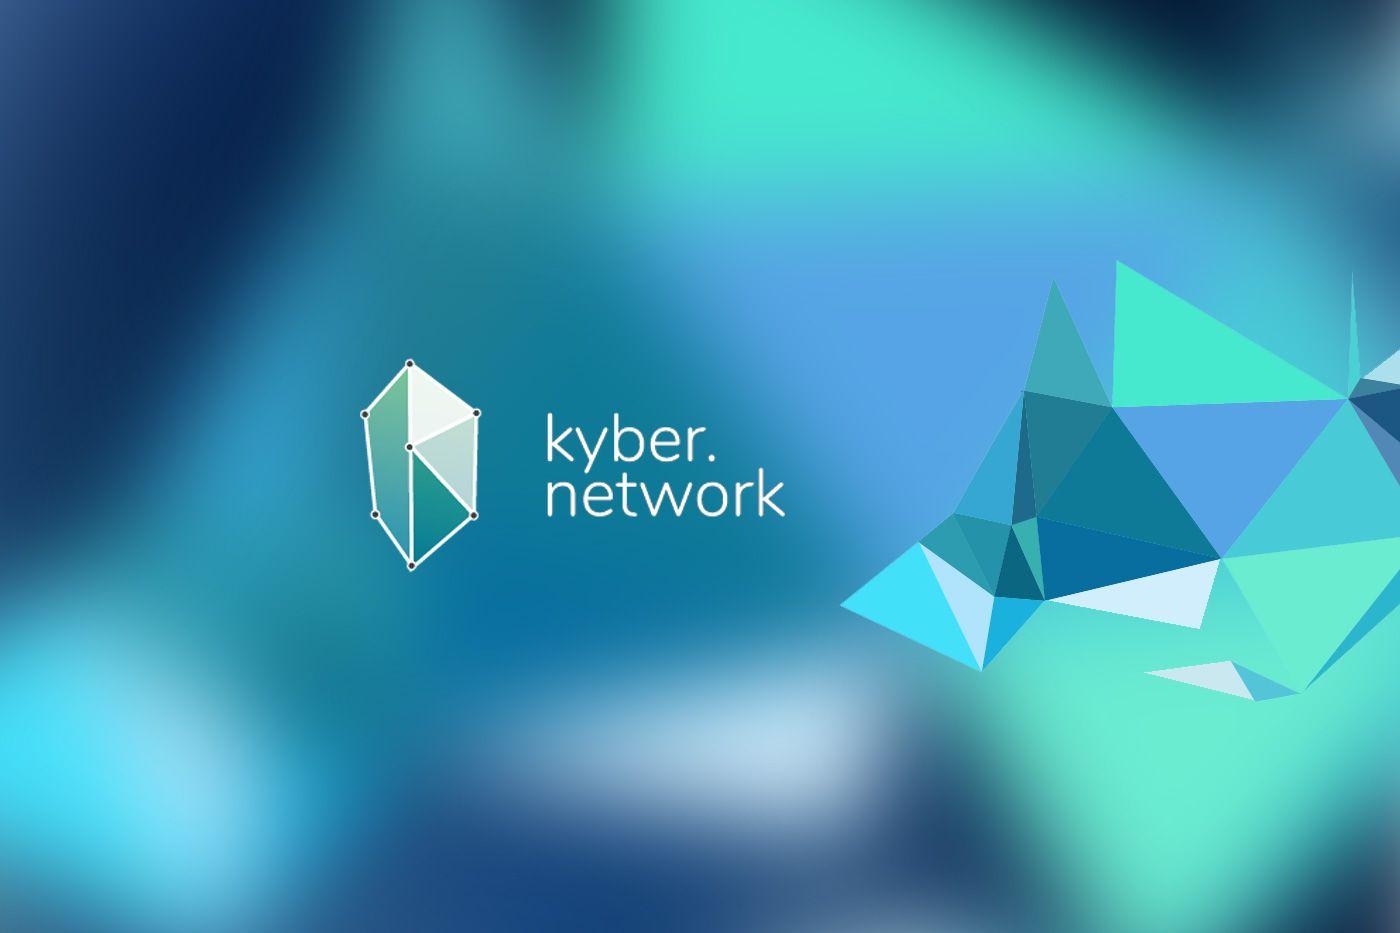 Kyber Network Logo - Guide to Kyber Network (KNC) Information, Review & How to Buy KNC